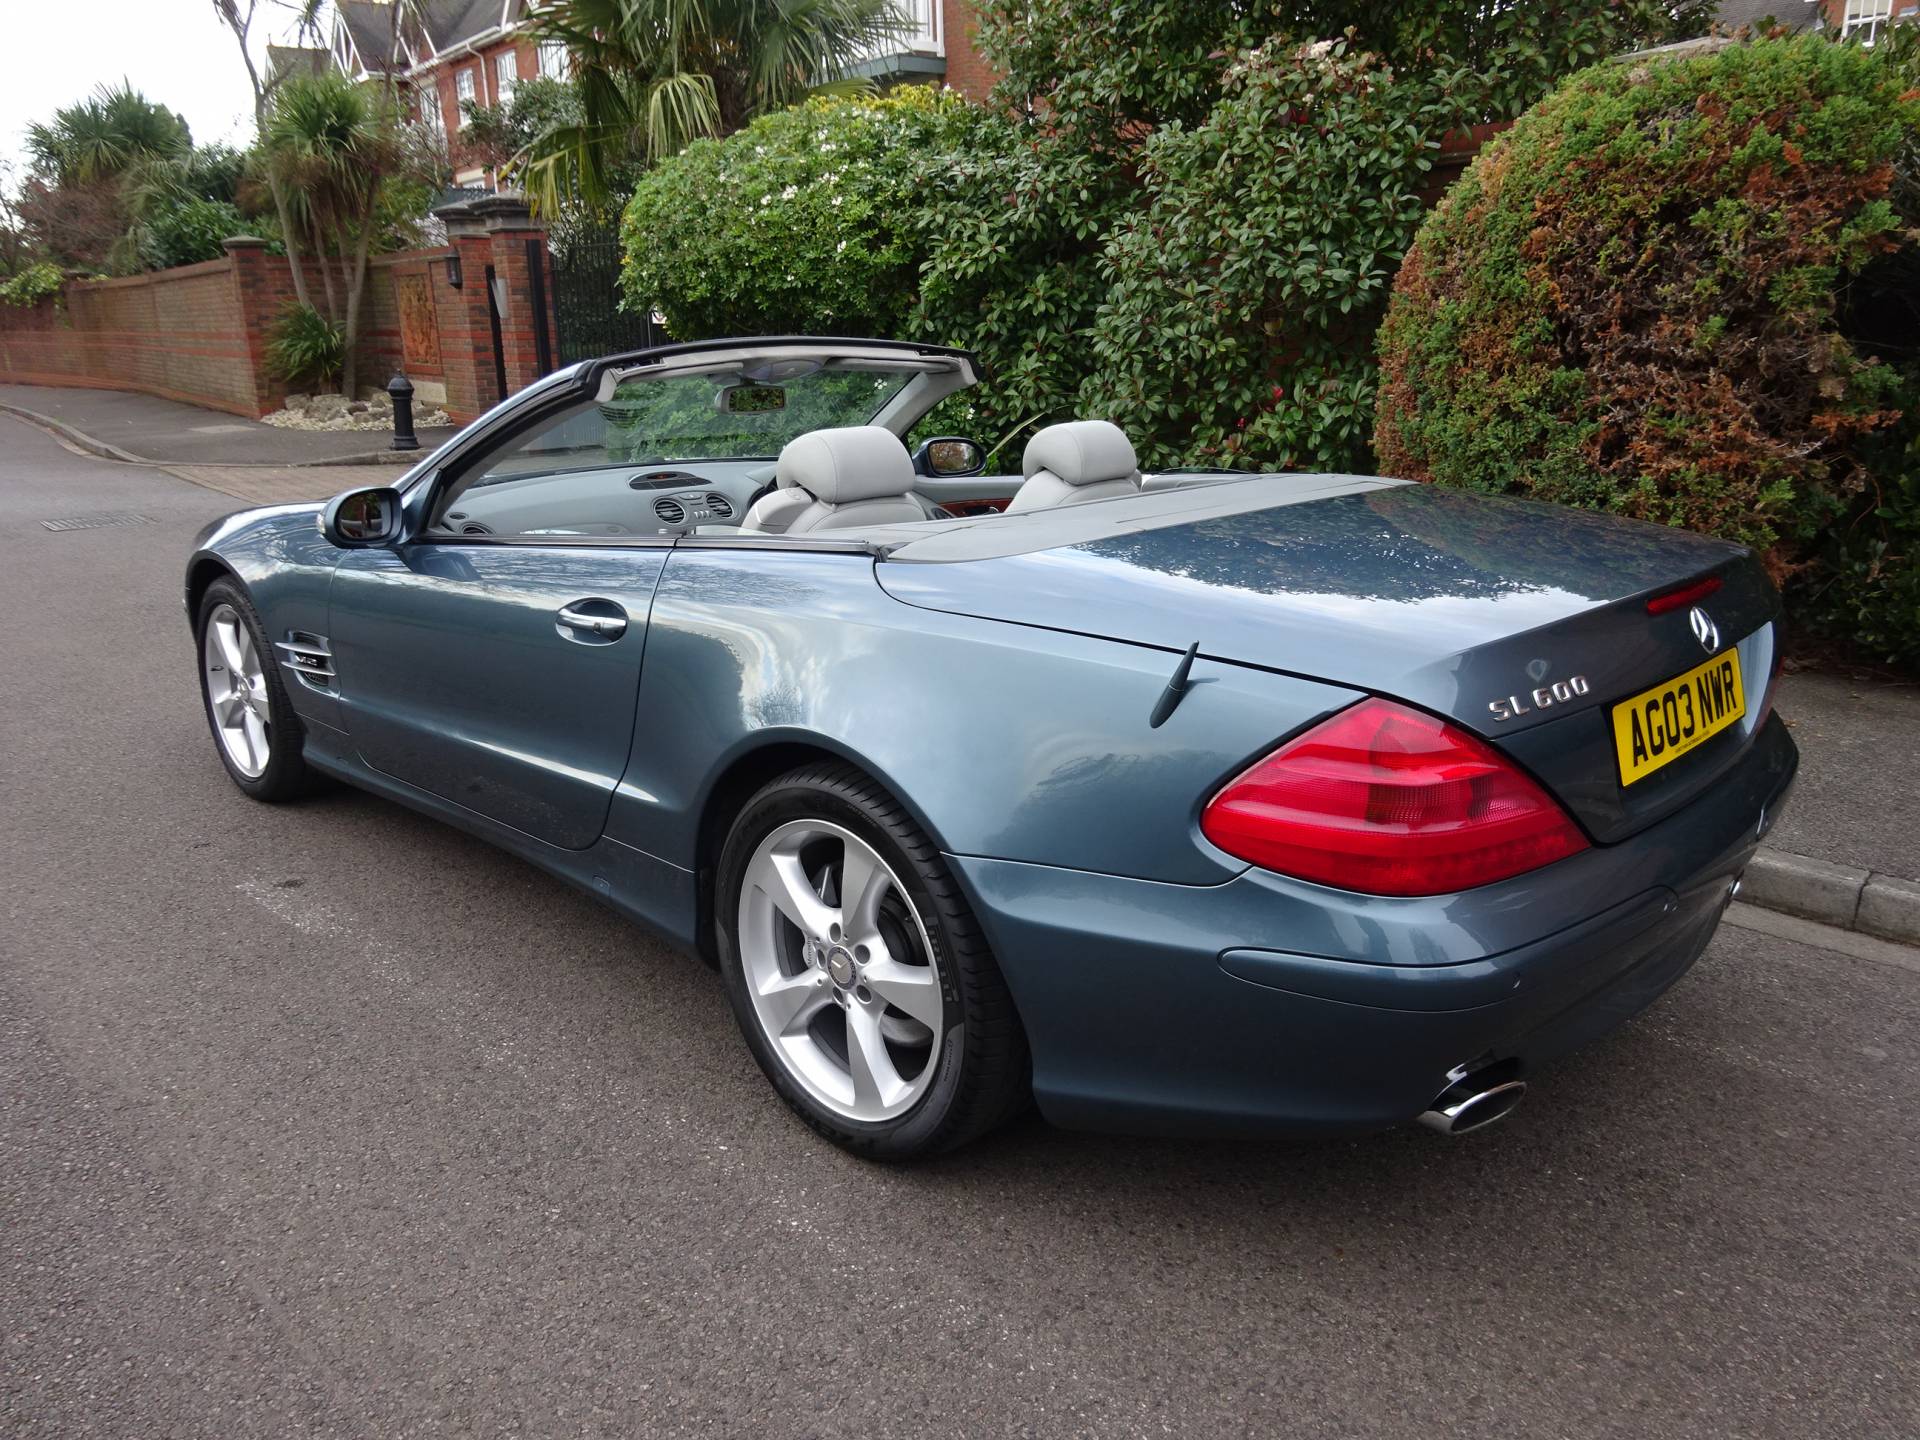 For Sale MercedesBenz SL 600 (2003) offered for GBP 18,995